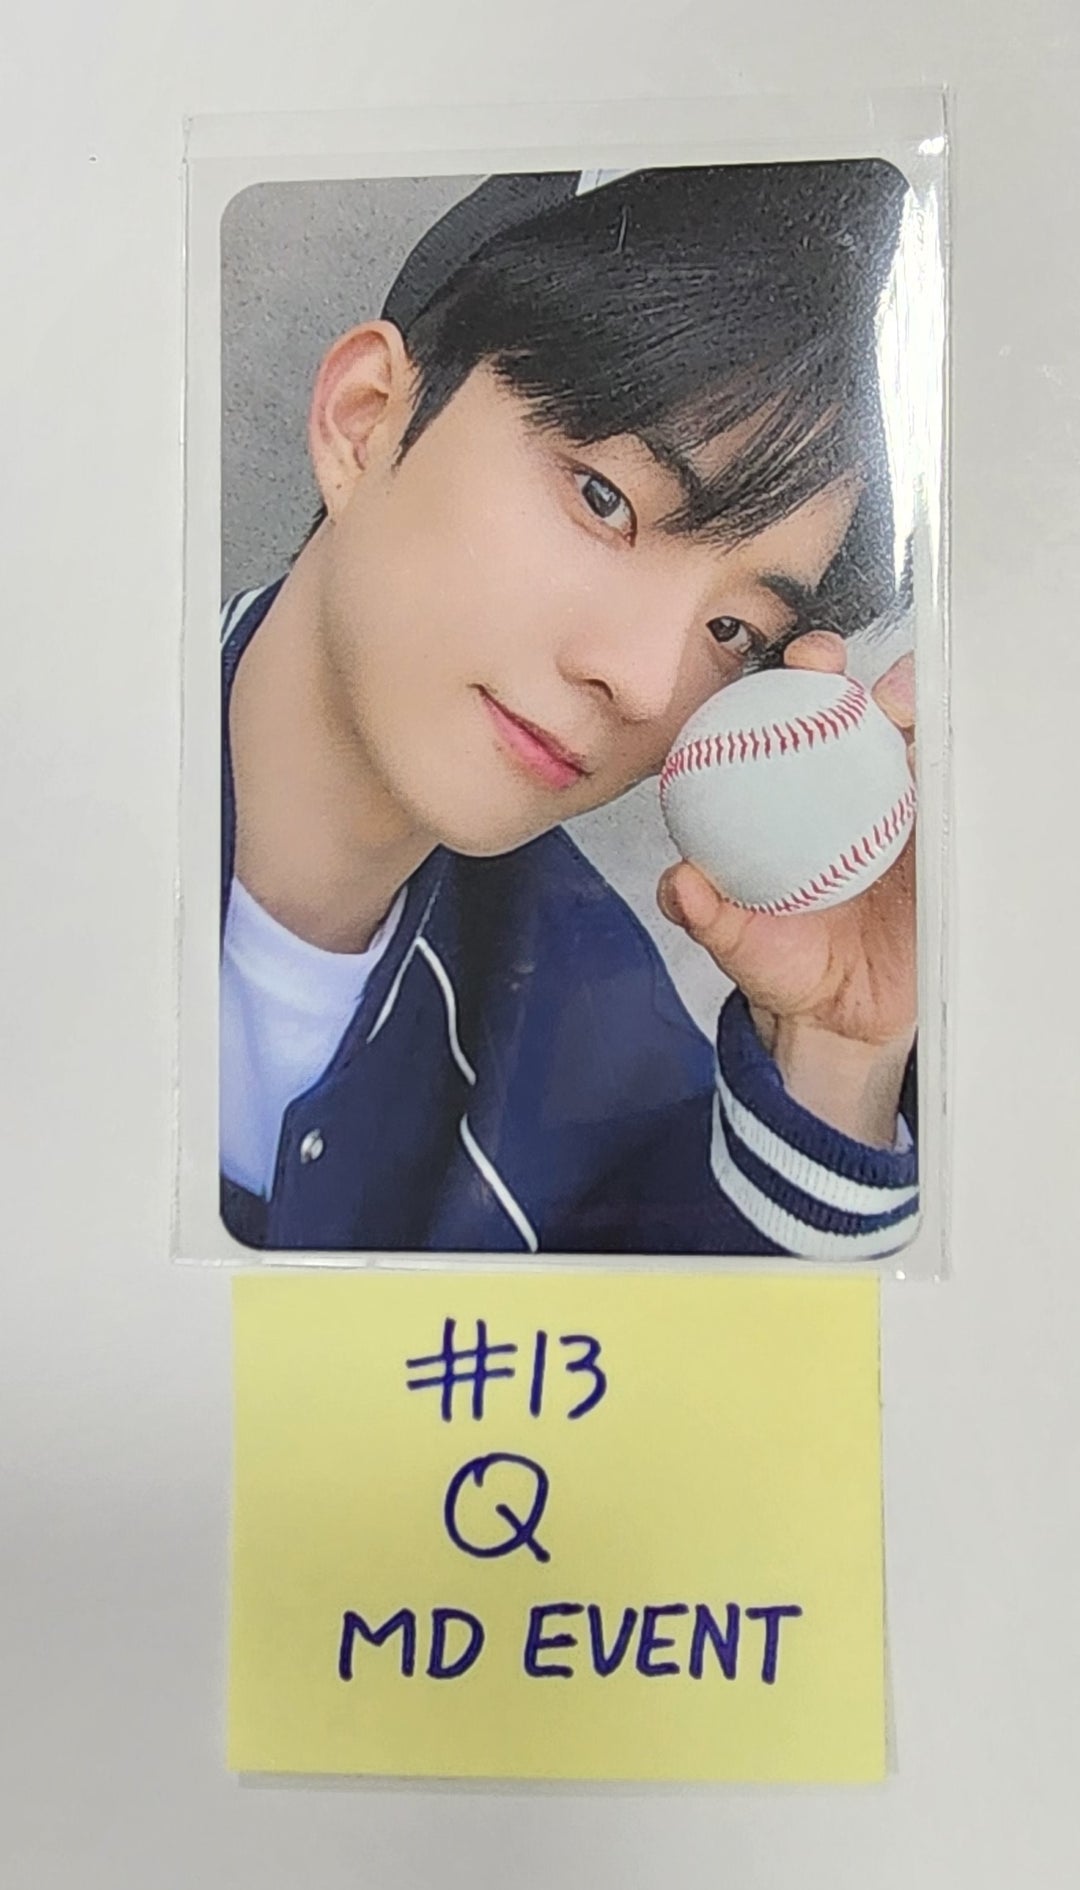 THE BOYZ "ZENERATION" 2ND WORLD TOUR - Withmuu MD Event Photocard & MD Round 2 [PAPERWEIGHT, Doll Keyring, Key Caps] [23.09.08]